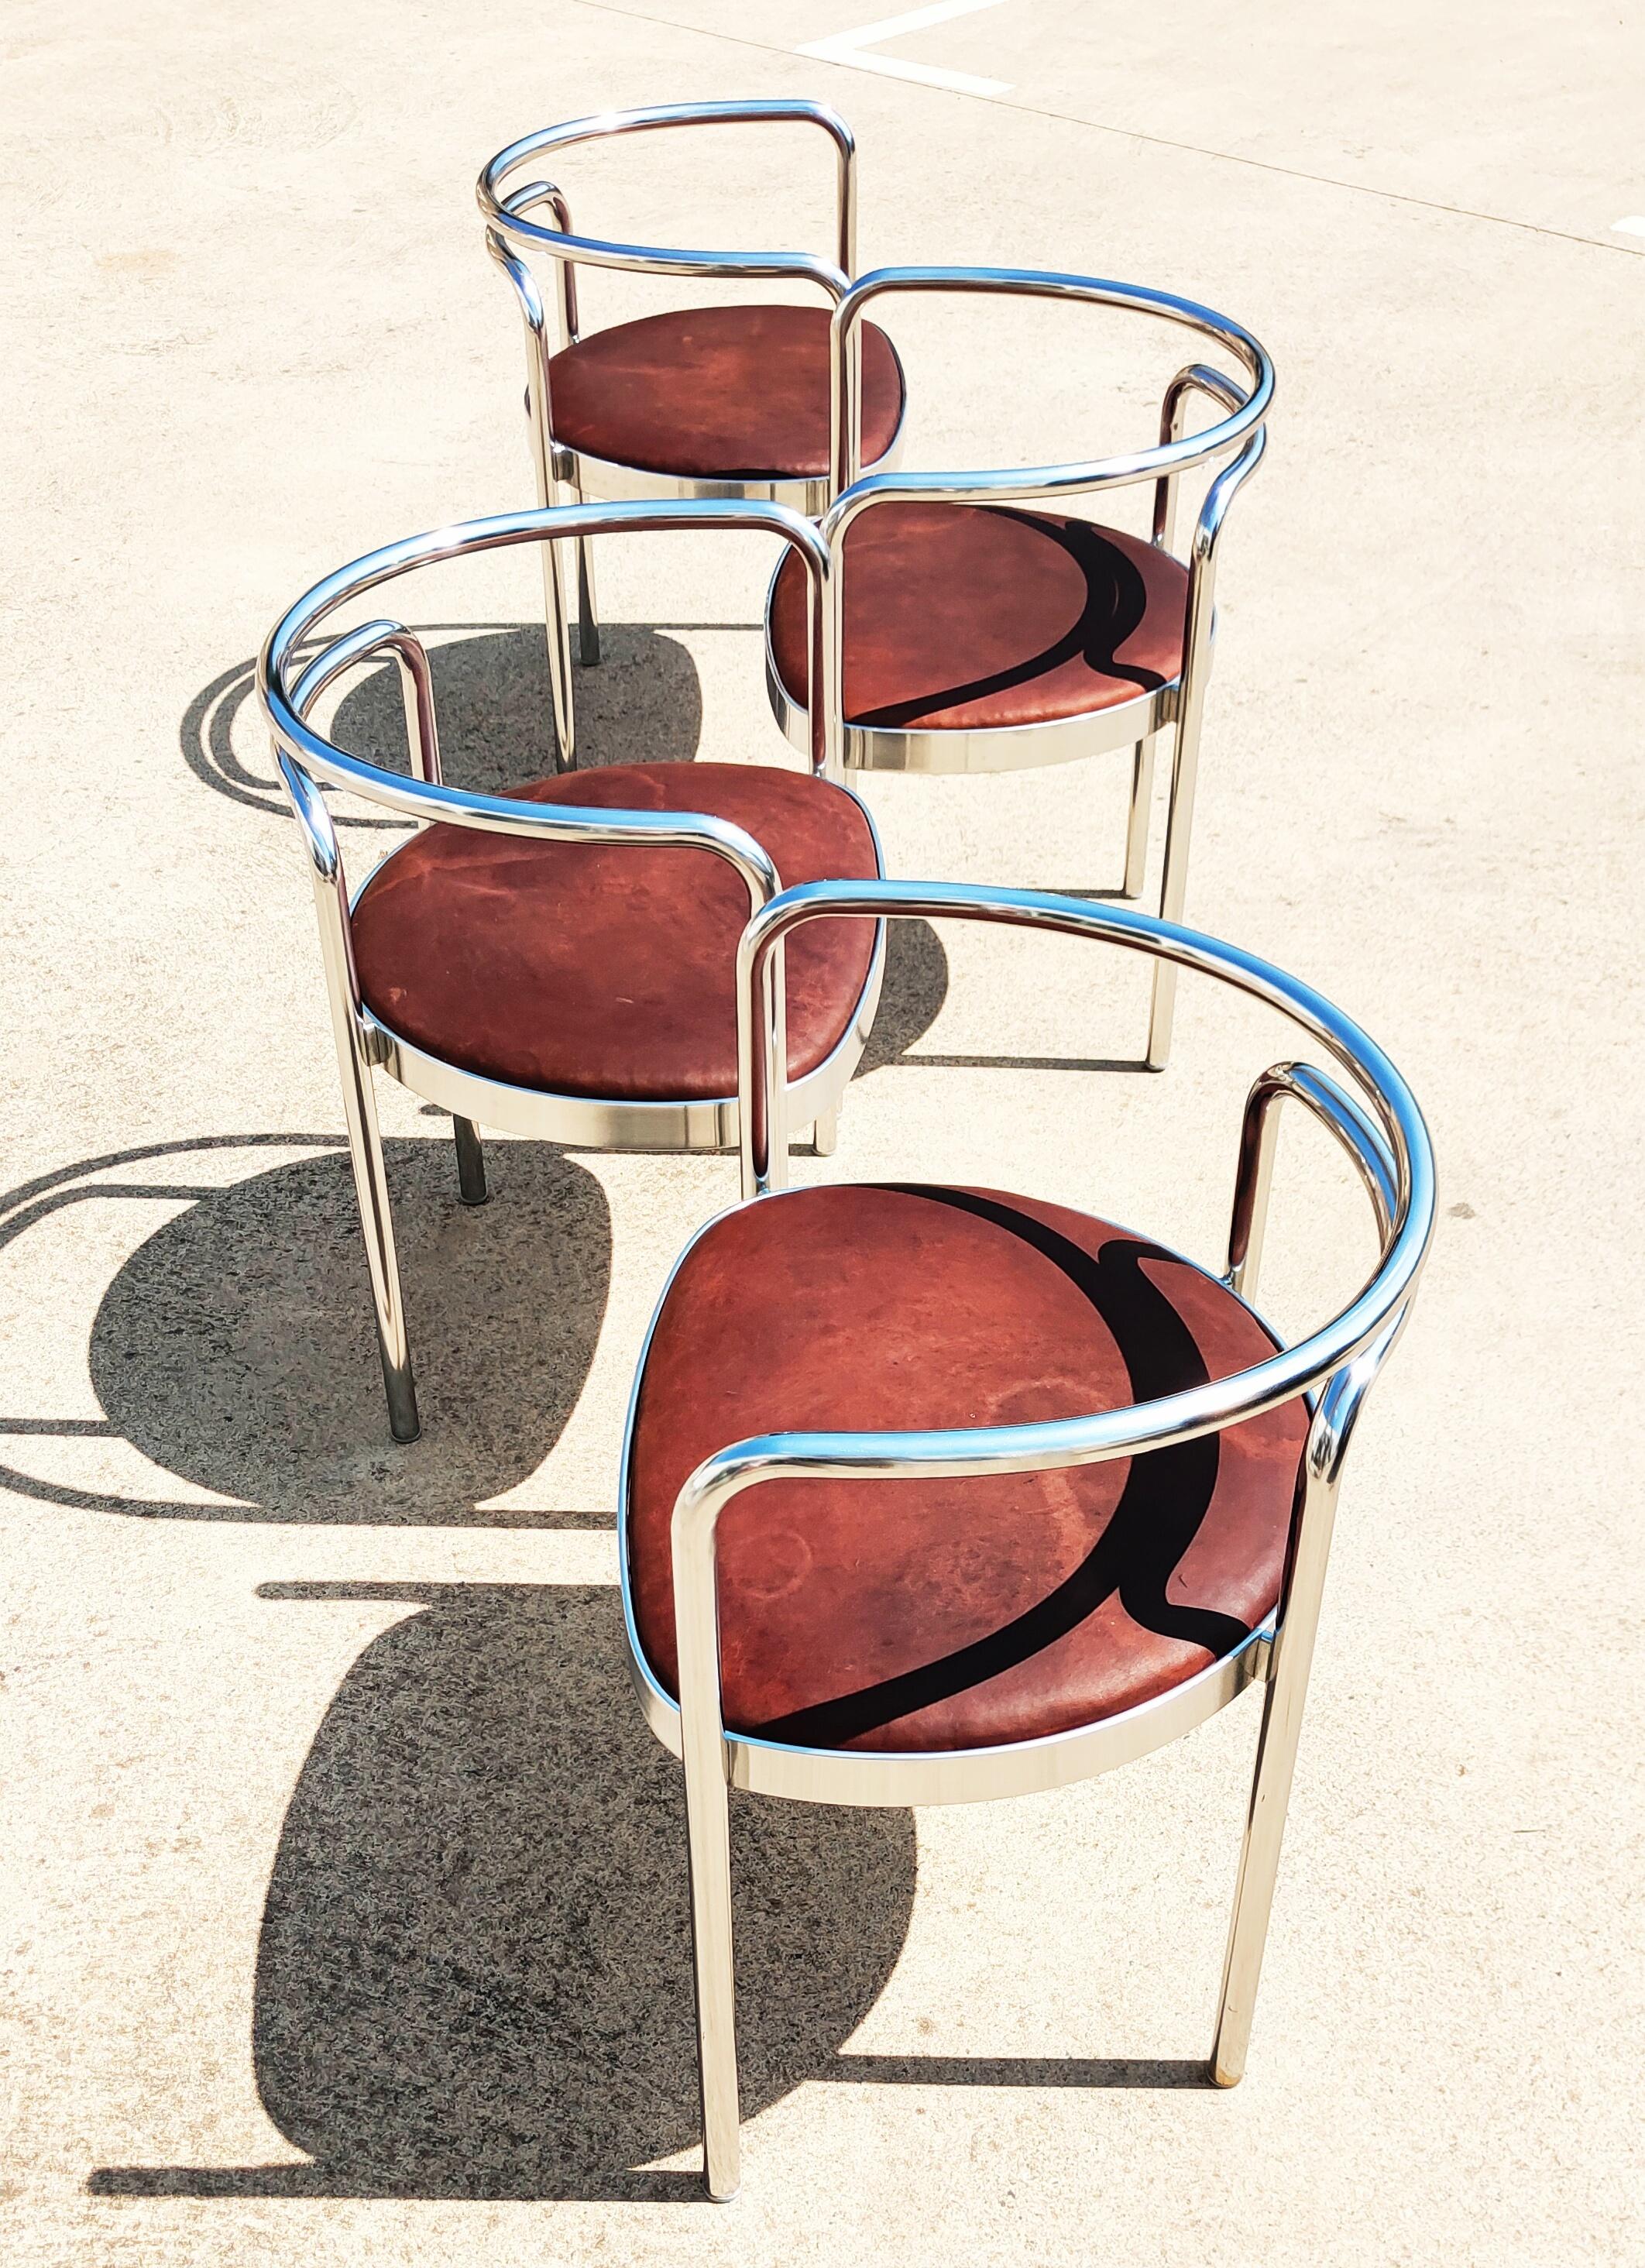 Very rare set of 4 Poul Kjærholm PK12 chairs in beautiful camel patined leather manufactured by E. Kold Christensen in 1964.
More than his contemporaries, the designer Poul Kjærholm worked with metal, rather than wood, and generally with flat